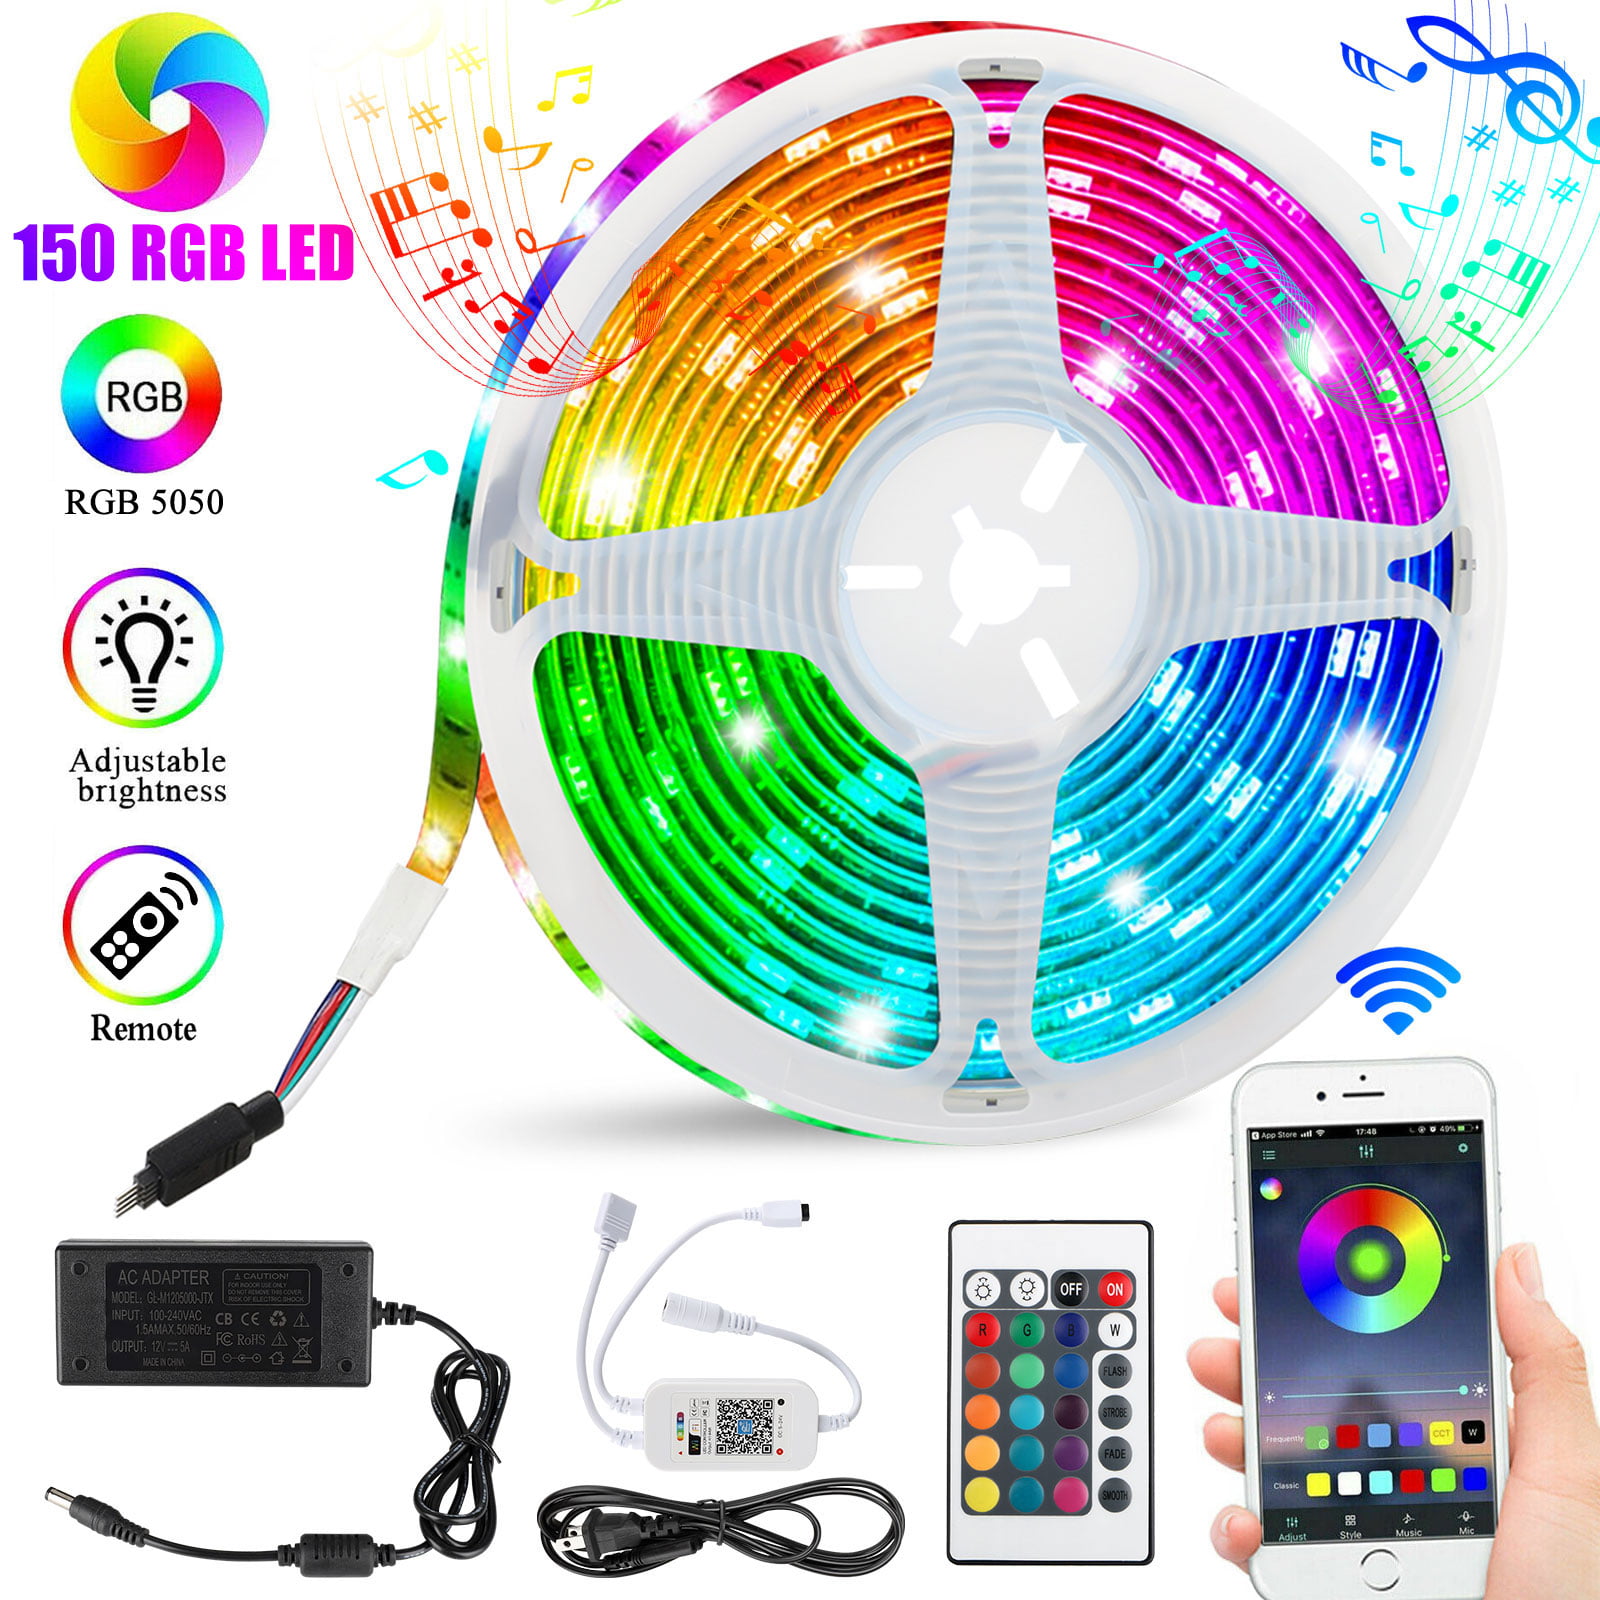 Details about   WiFi Smart LED RGB Strip Light Phone Controller For Google  Home APP Control 